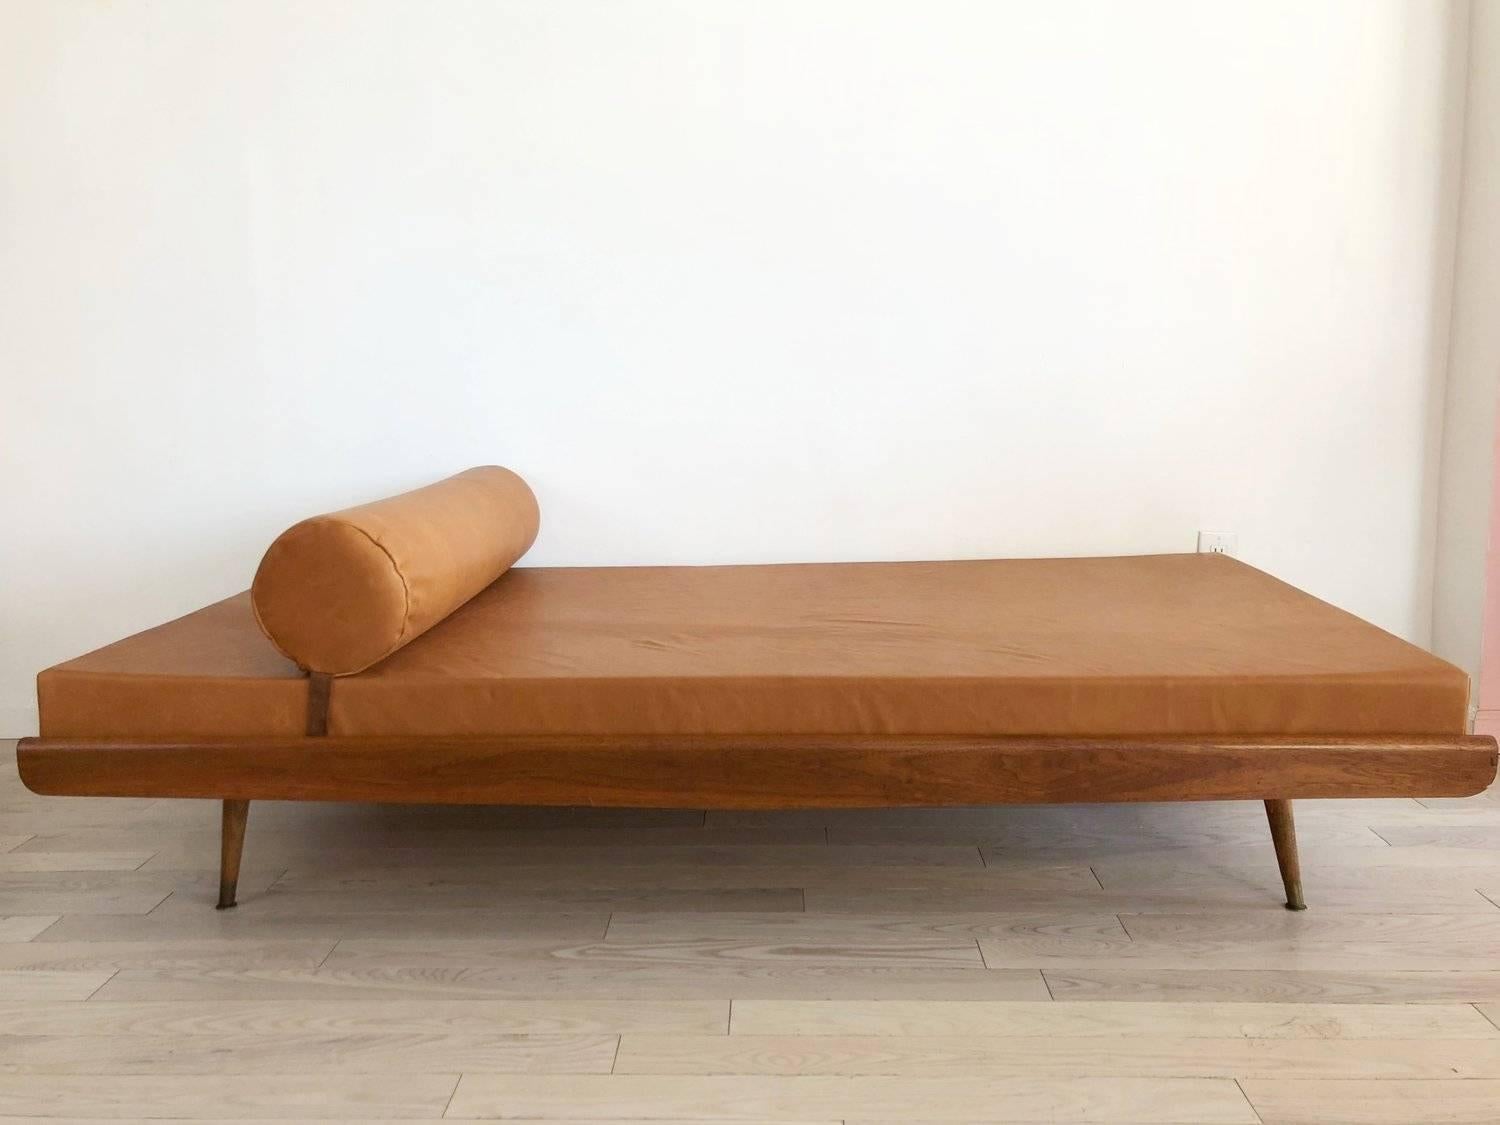 American Mid-Century Lounge Daybed in Caramel Genuine Leather Upholstery